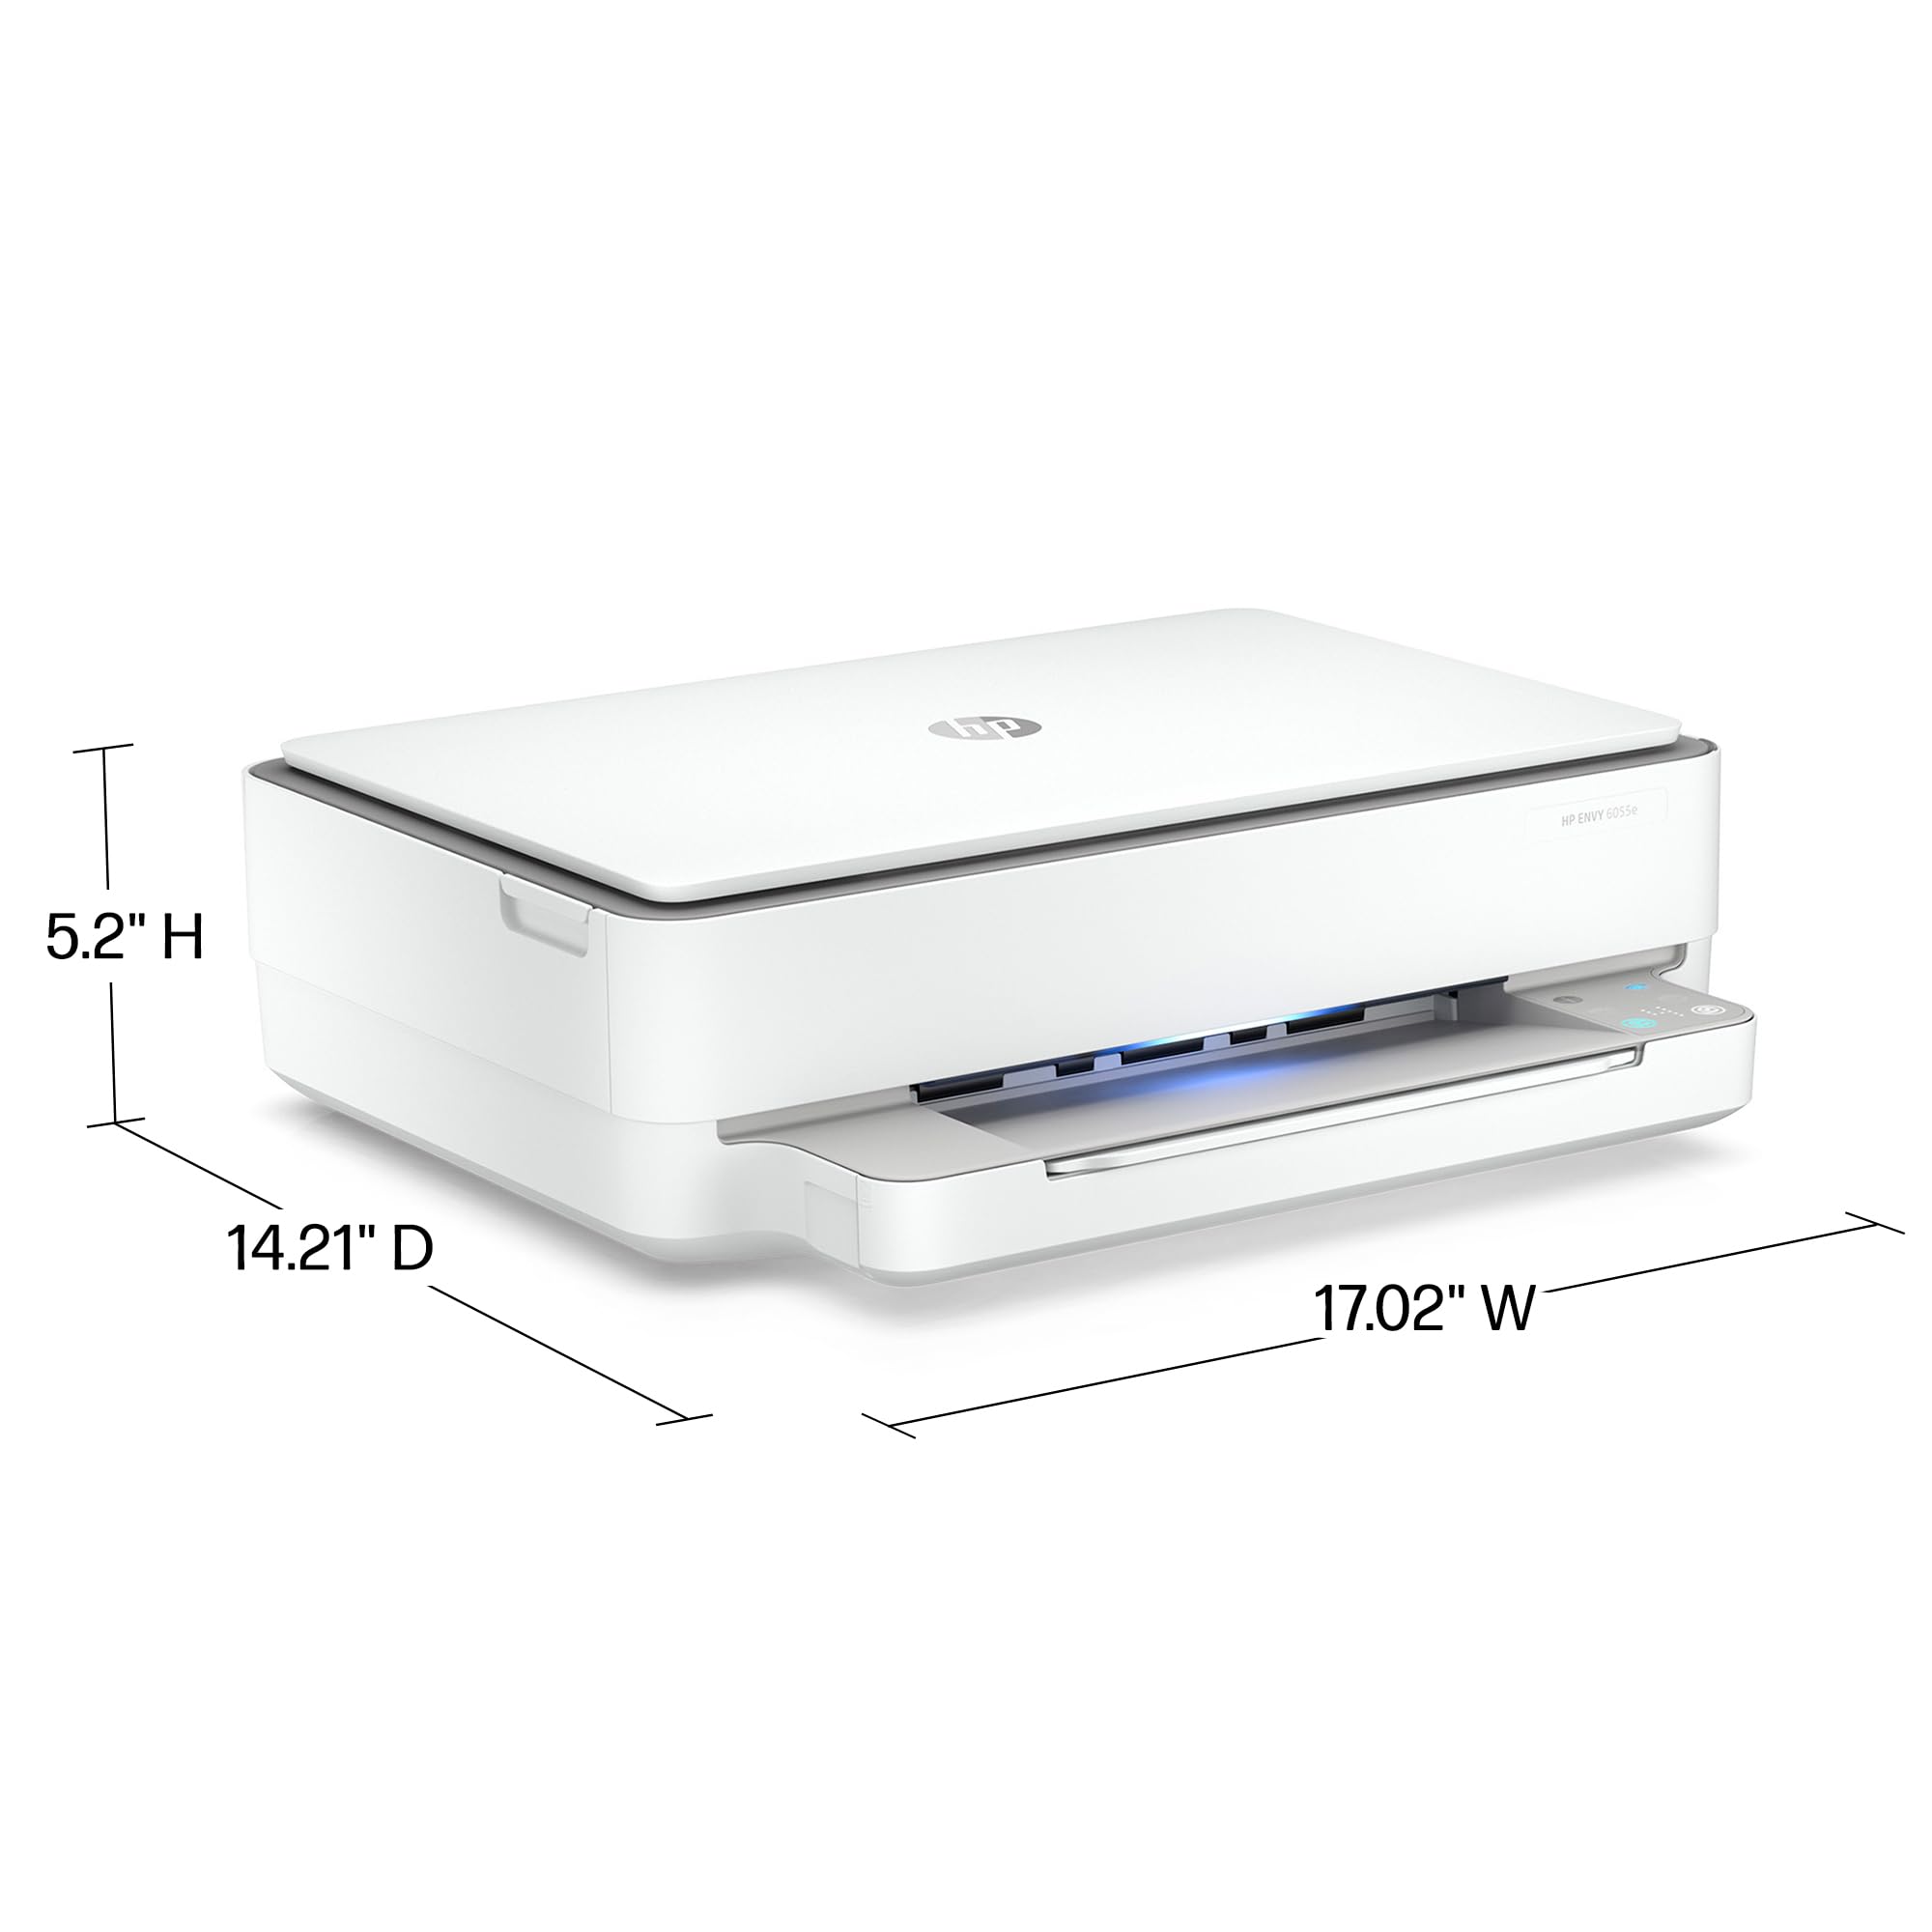 HP ENVY 6055e Wireless Color Inkjet Printer, Print, scan, copy, Easy setup, Mobile printing, Best for home, Instant Ink with HP+,white